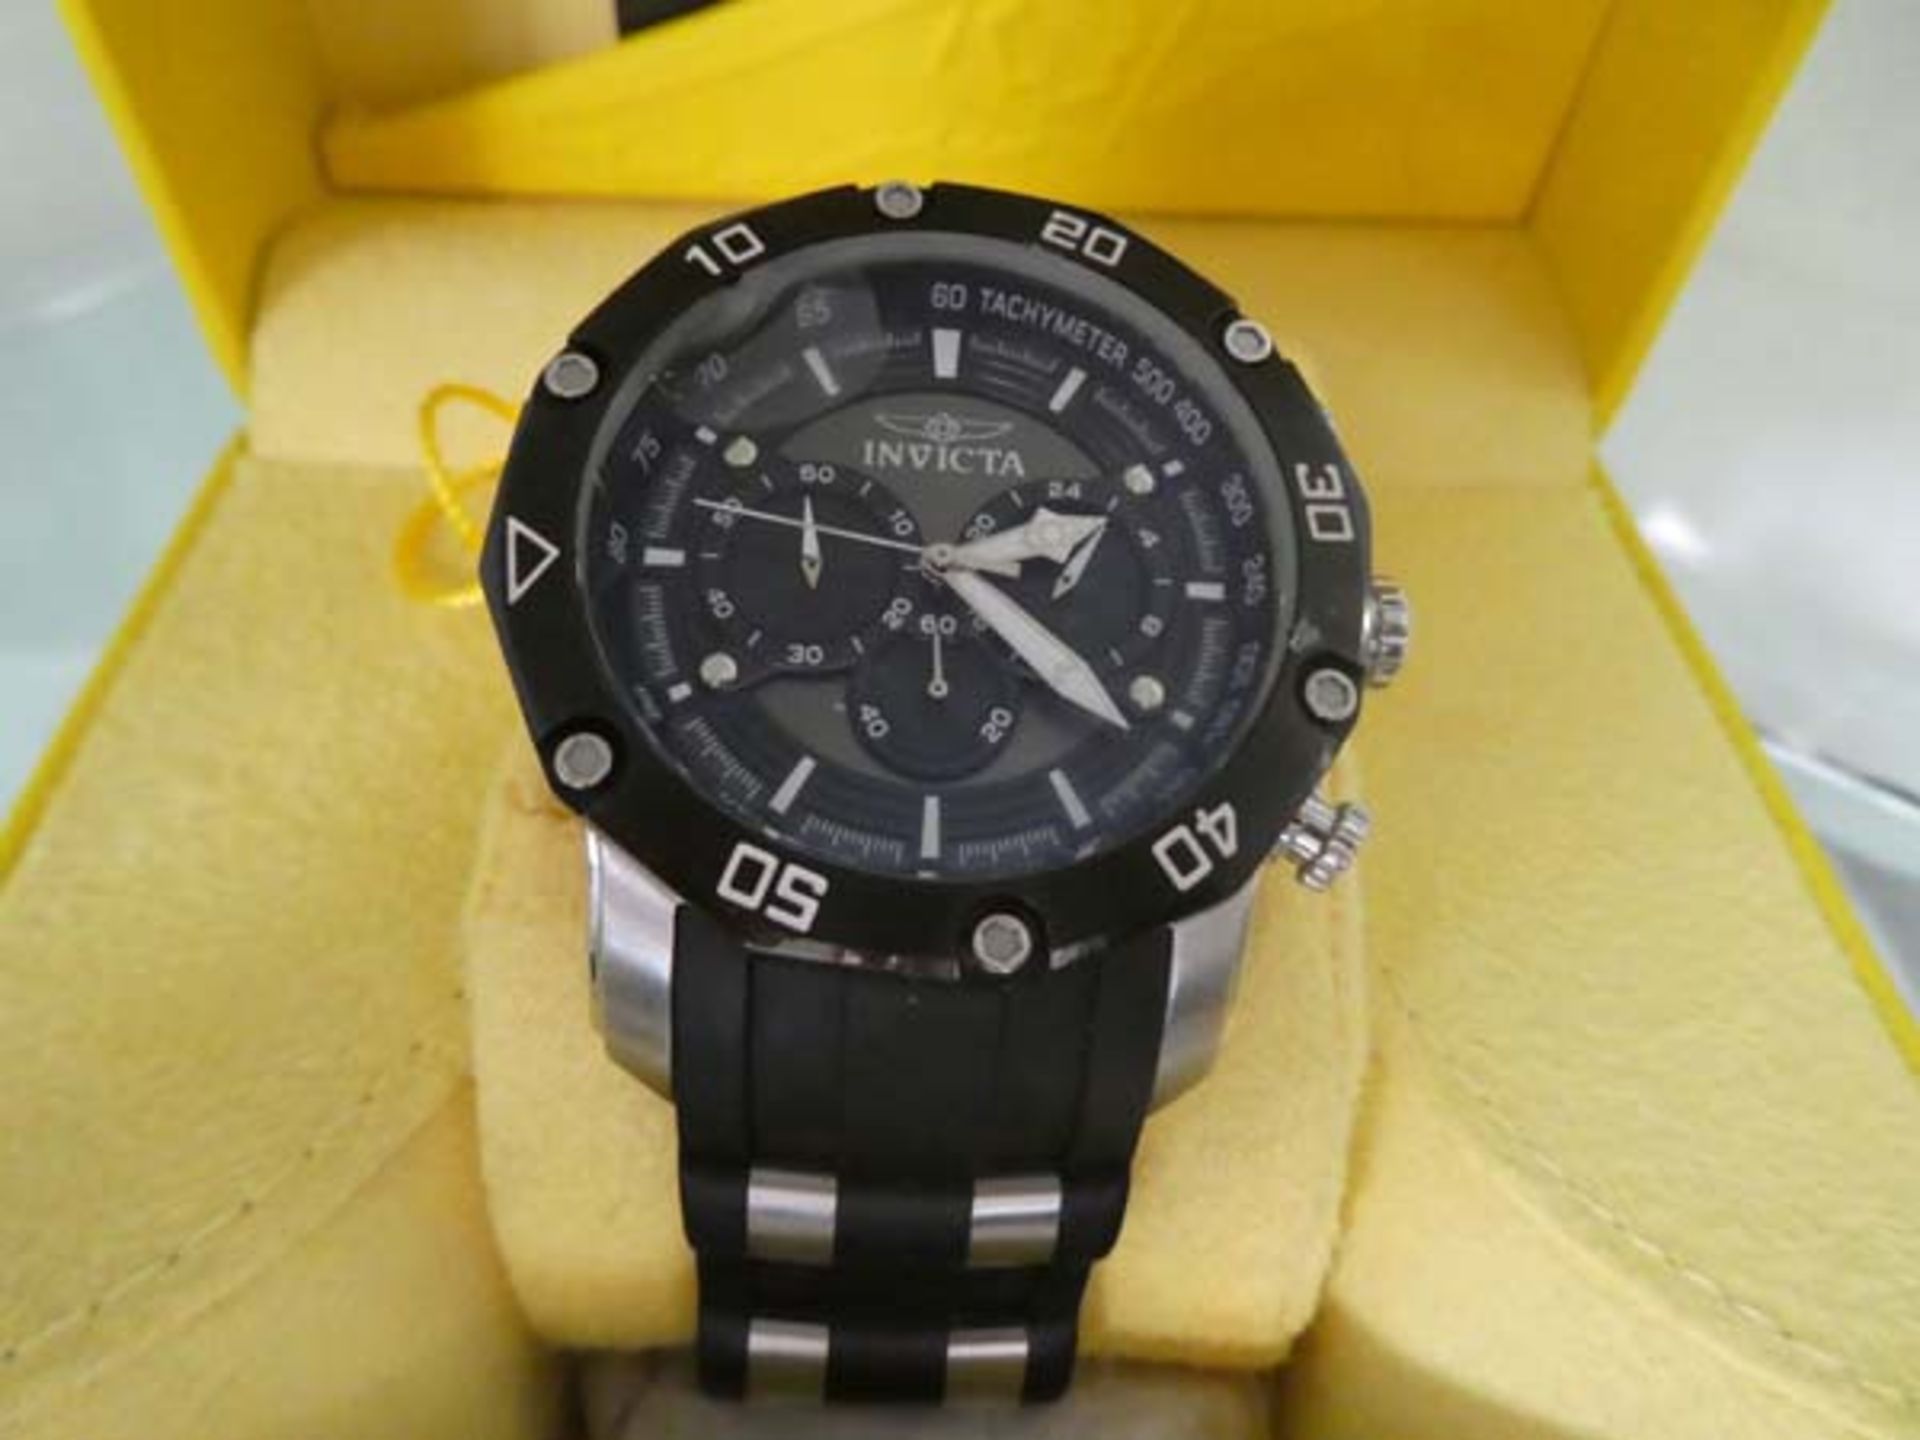 2134 - Gents Invicta oversized rubber strap wristwatch, in box Damaged glass